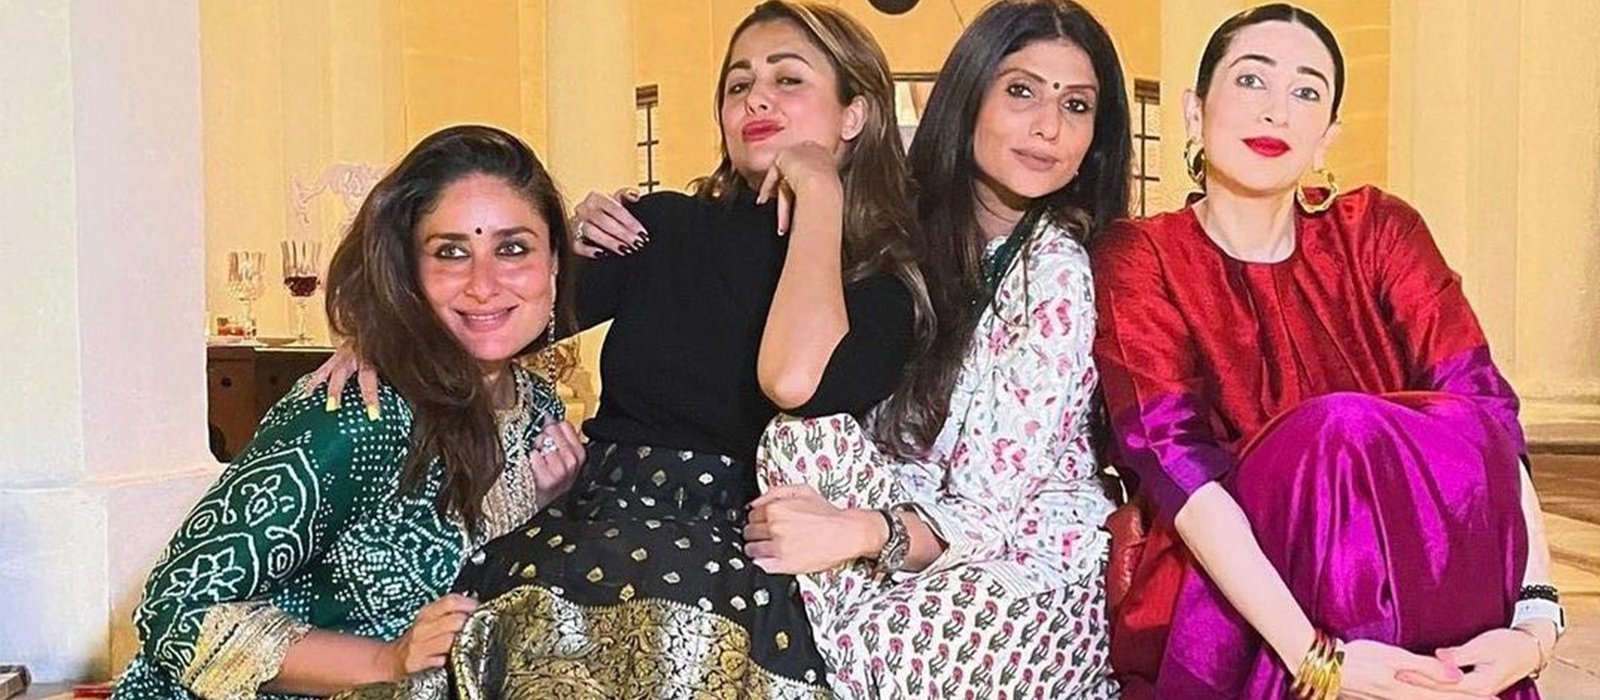 Update by Kareena Kapoor after the Covid: “We are back”